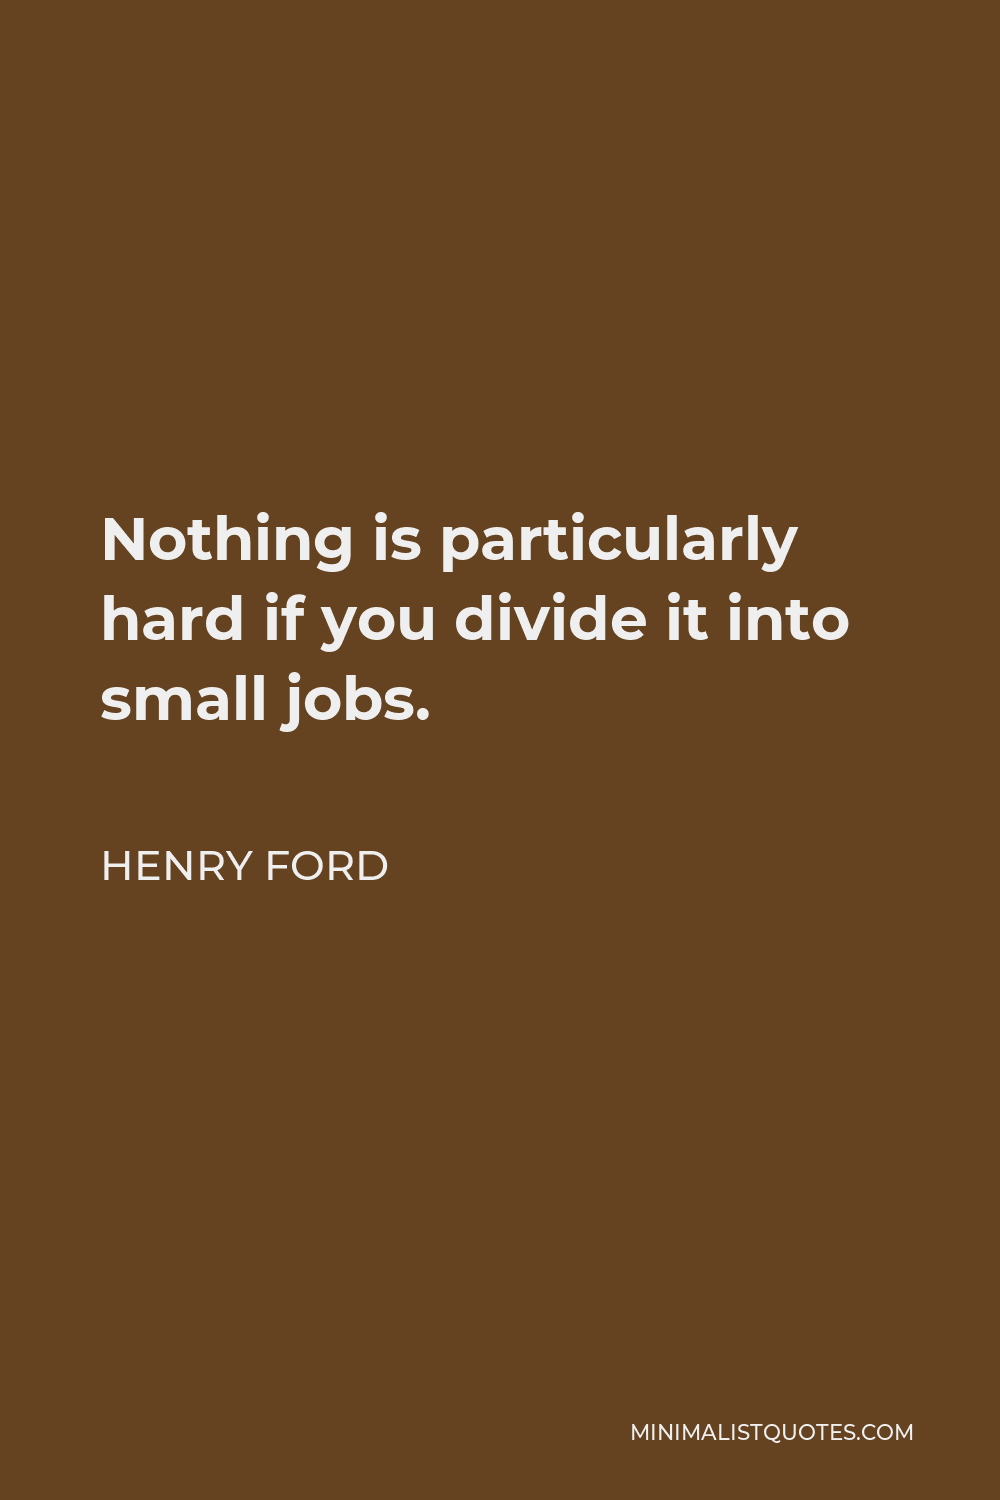 Henry Ford Quote - Nothing is particularly hard if you divide it into small jobs.